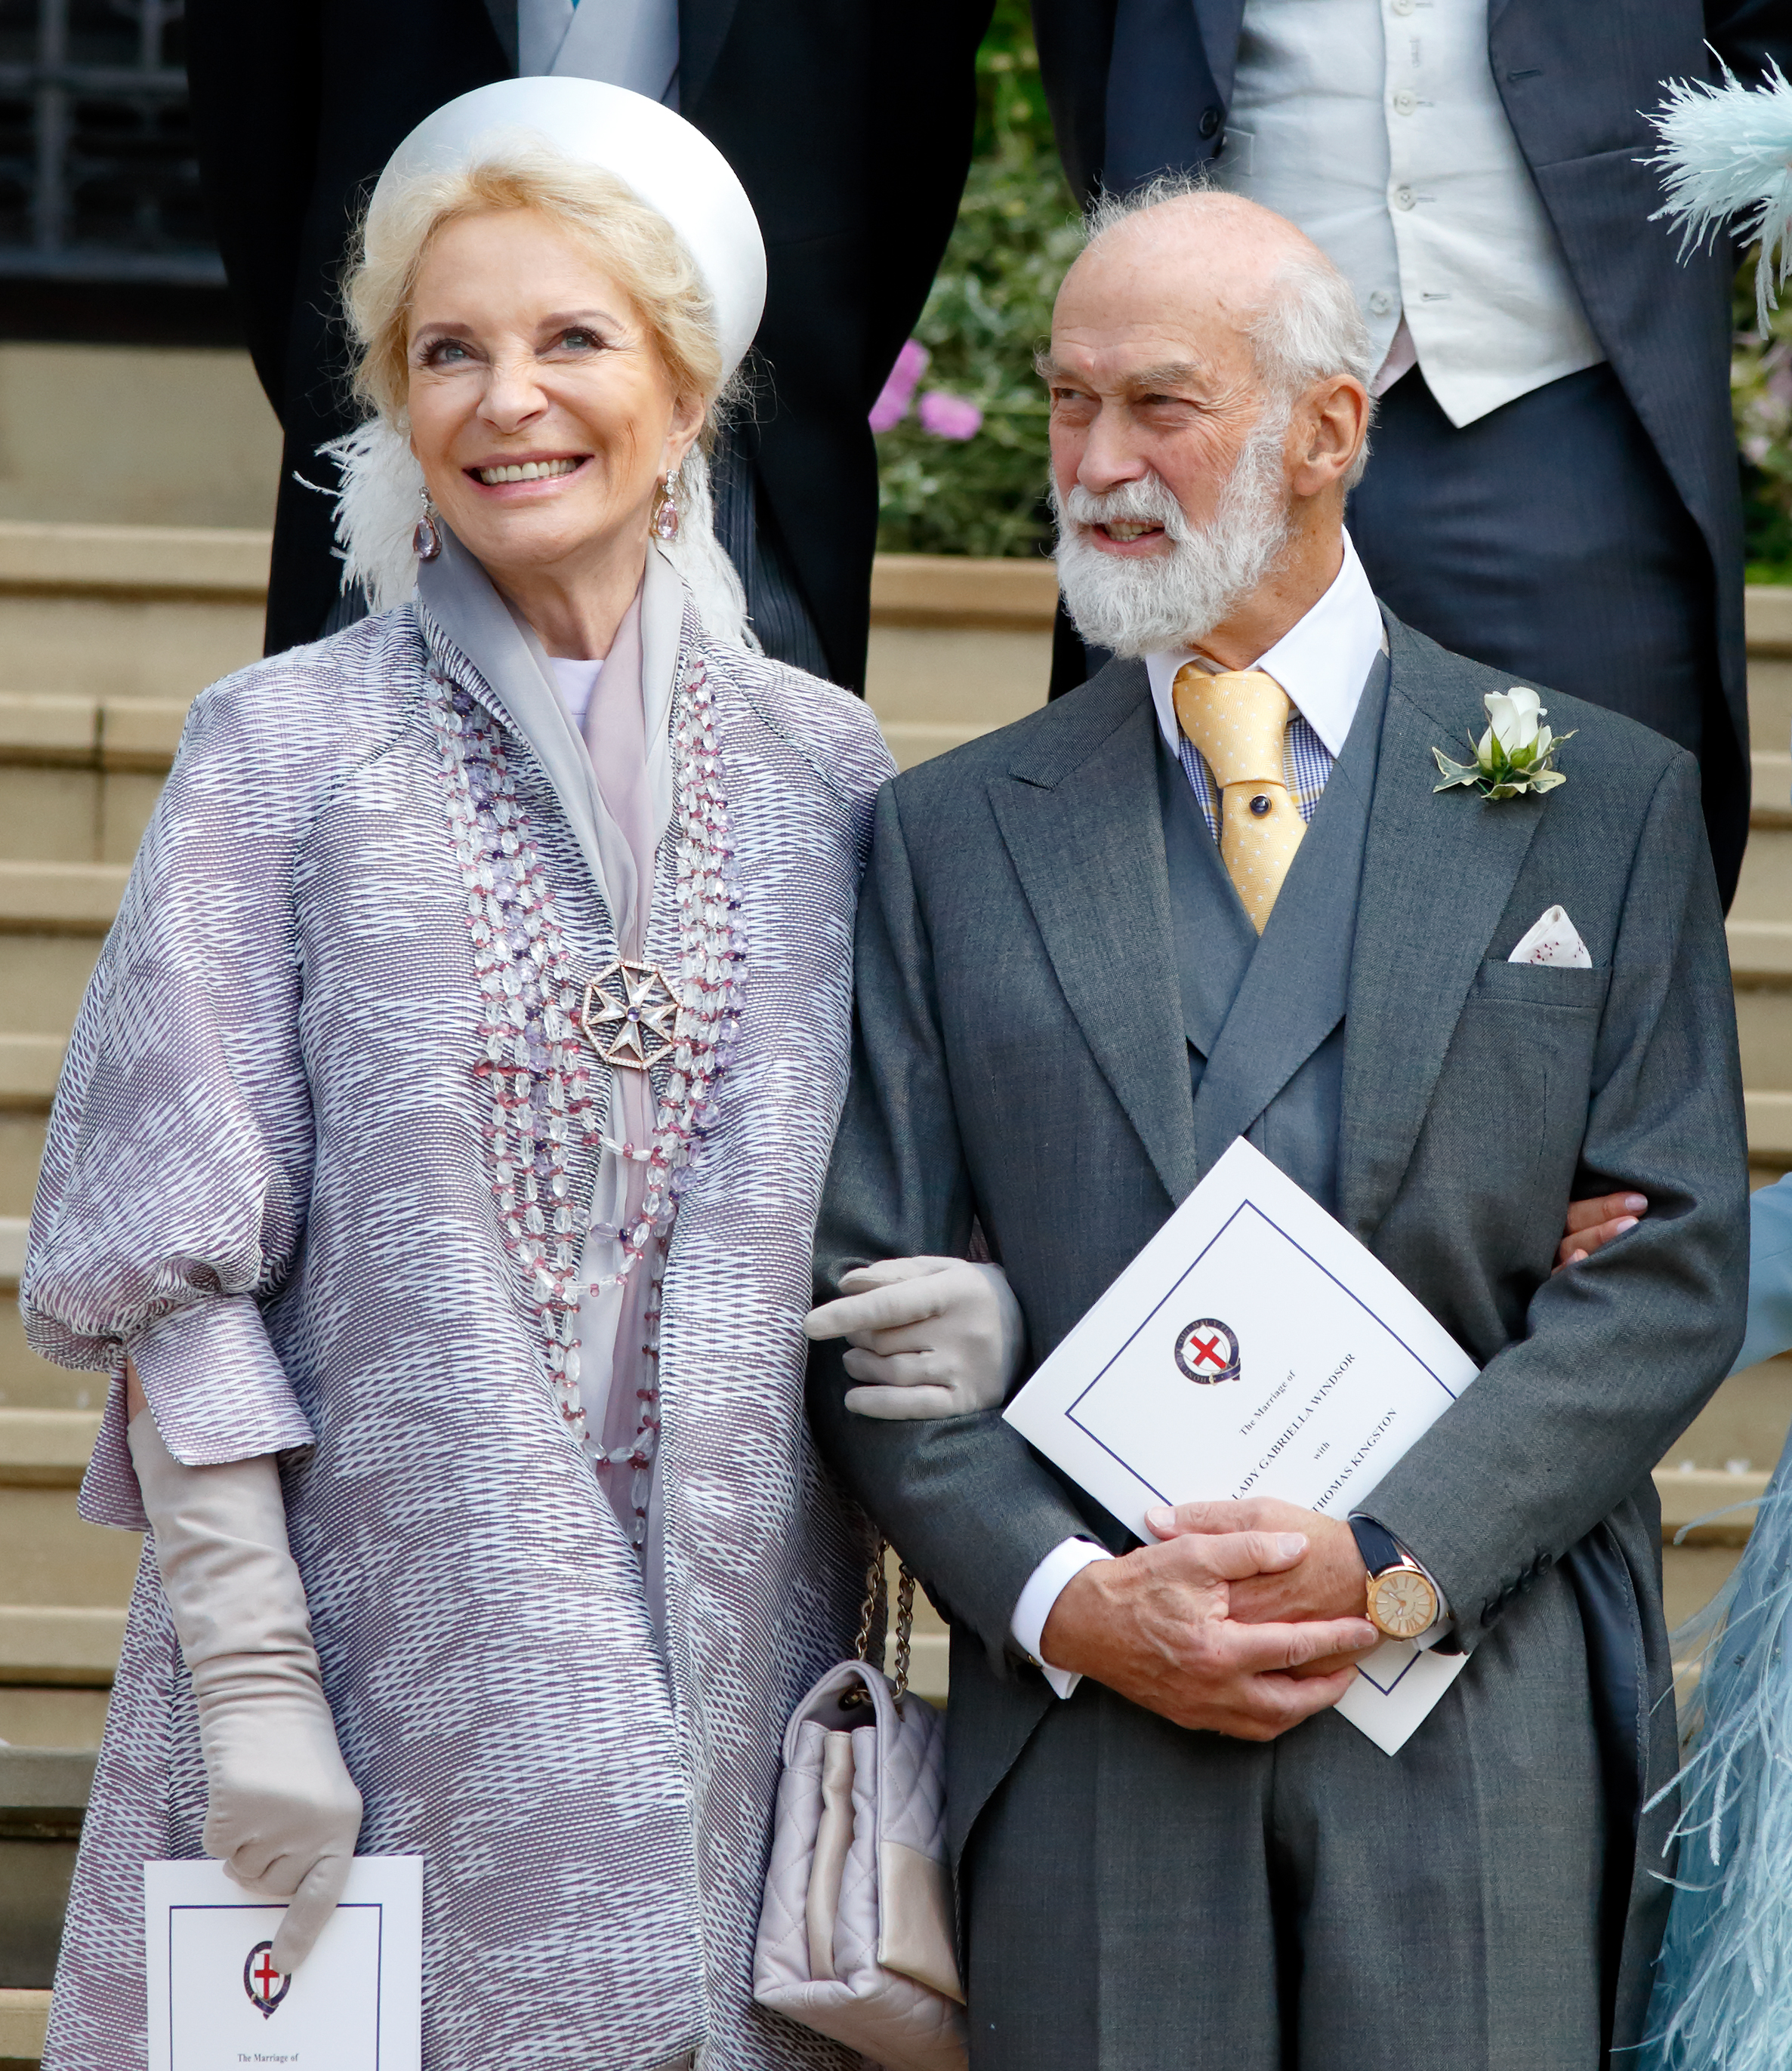 Princess Michael of Kent and Prince Michael of Kent at Lady Gabriella and Thomas Kingston's wedding in Windsor, England on May 18, 2019 | Source: Getty Images